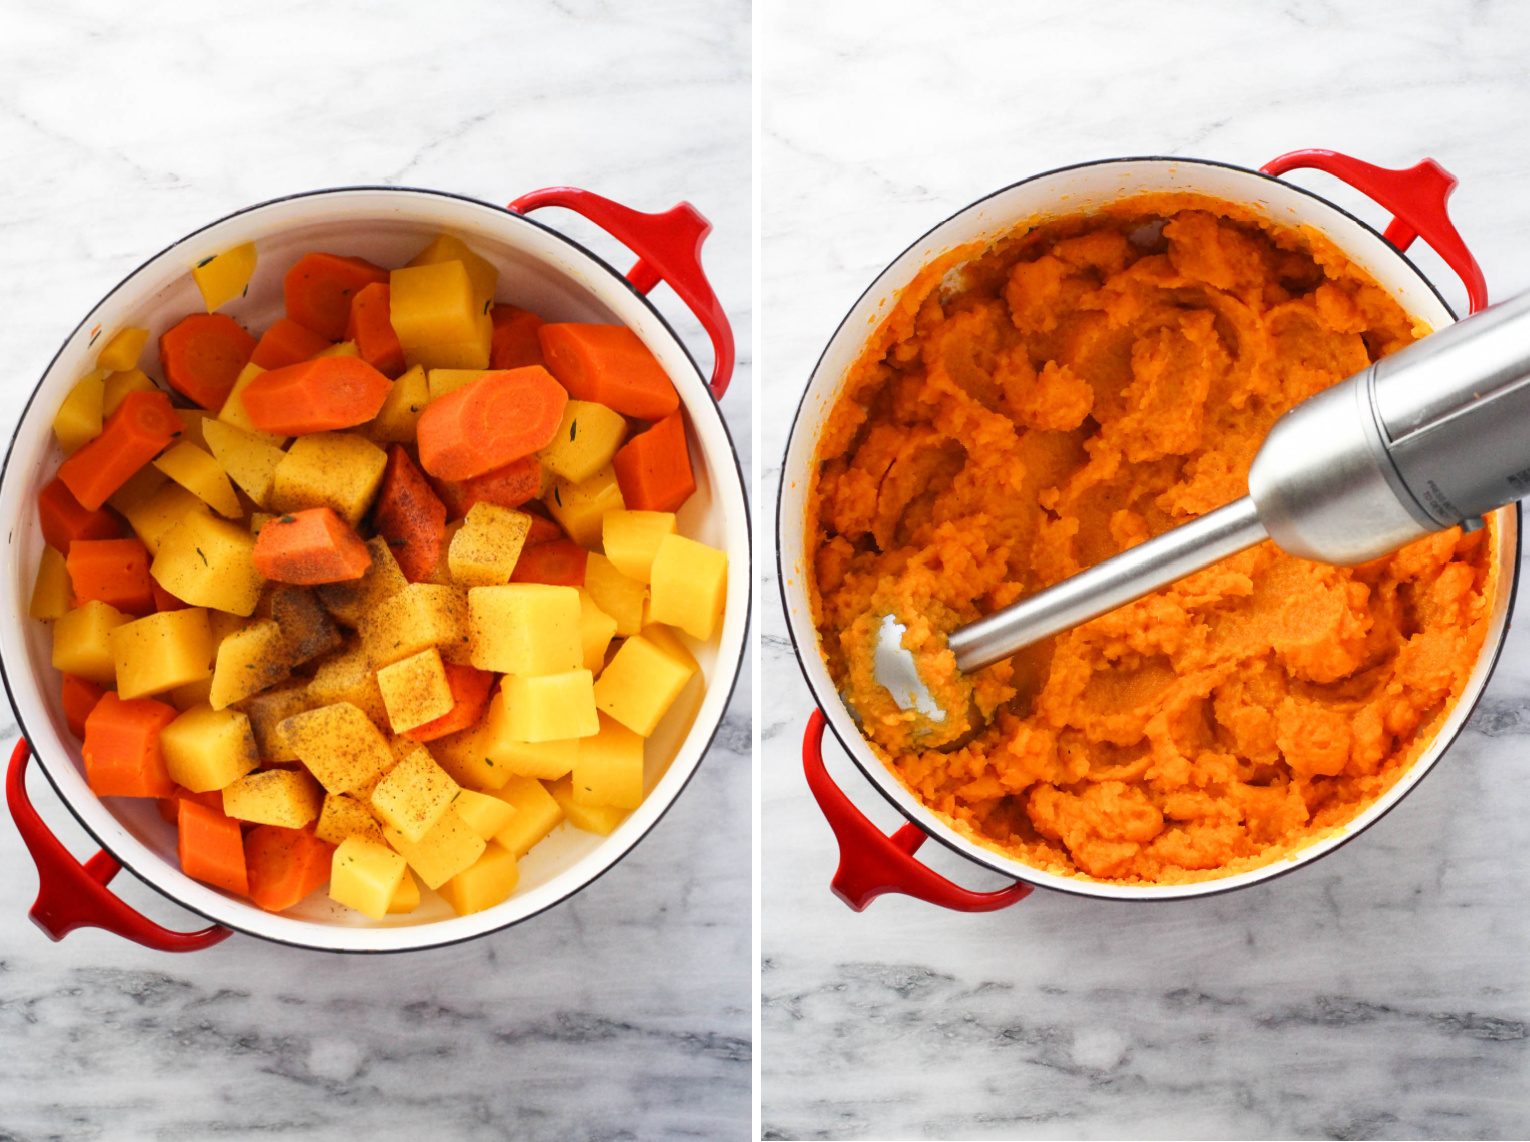 Two images side-by-side. On the left image, cooked swede and carrots in a pot. On the right image, carrots and swede being pureed with an immersion blender.